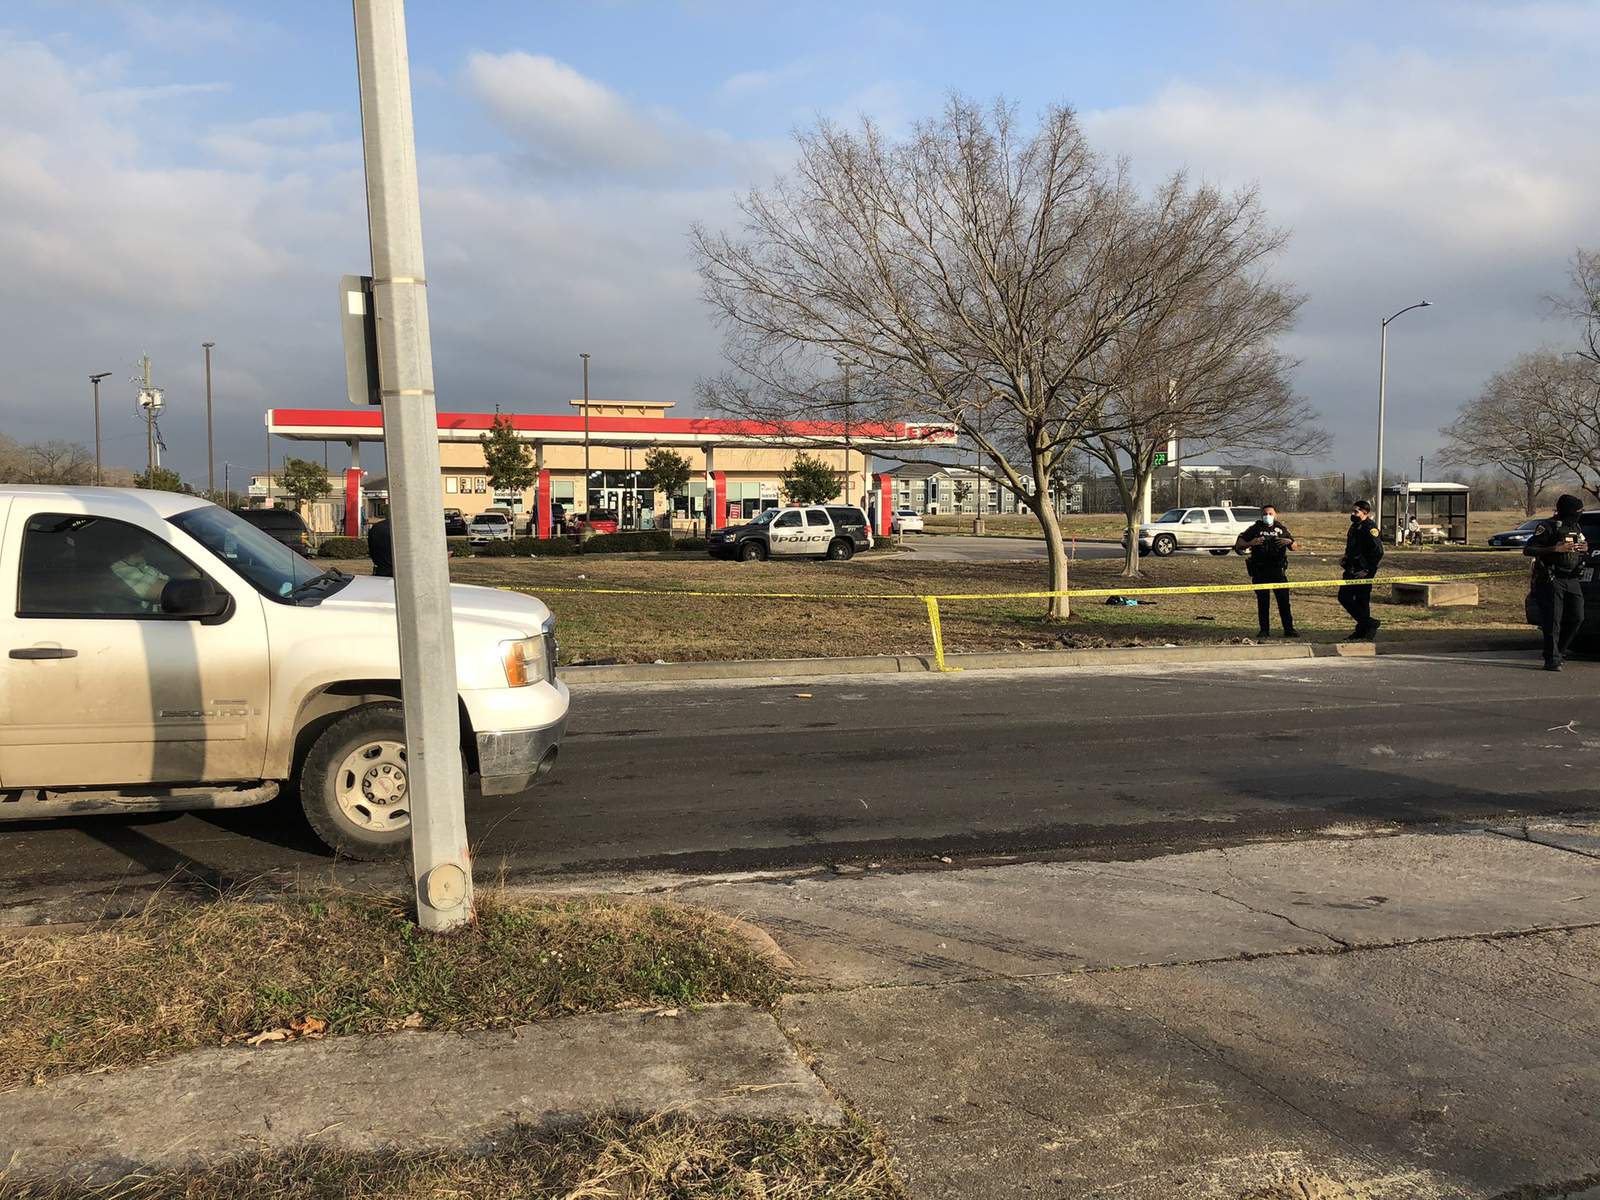 17-year-old killed in shooting in southeast Houston, Houston police say